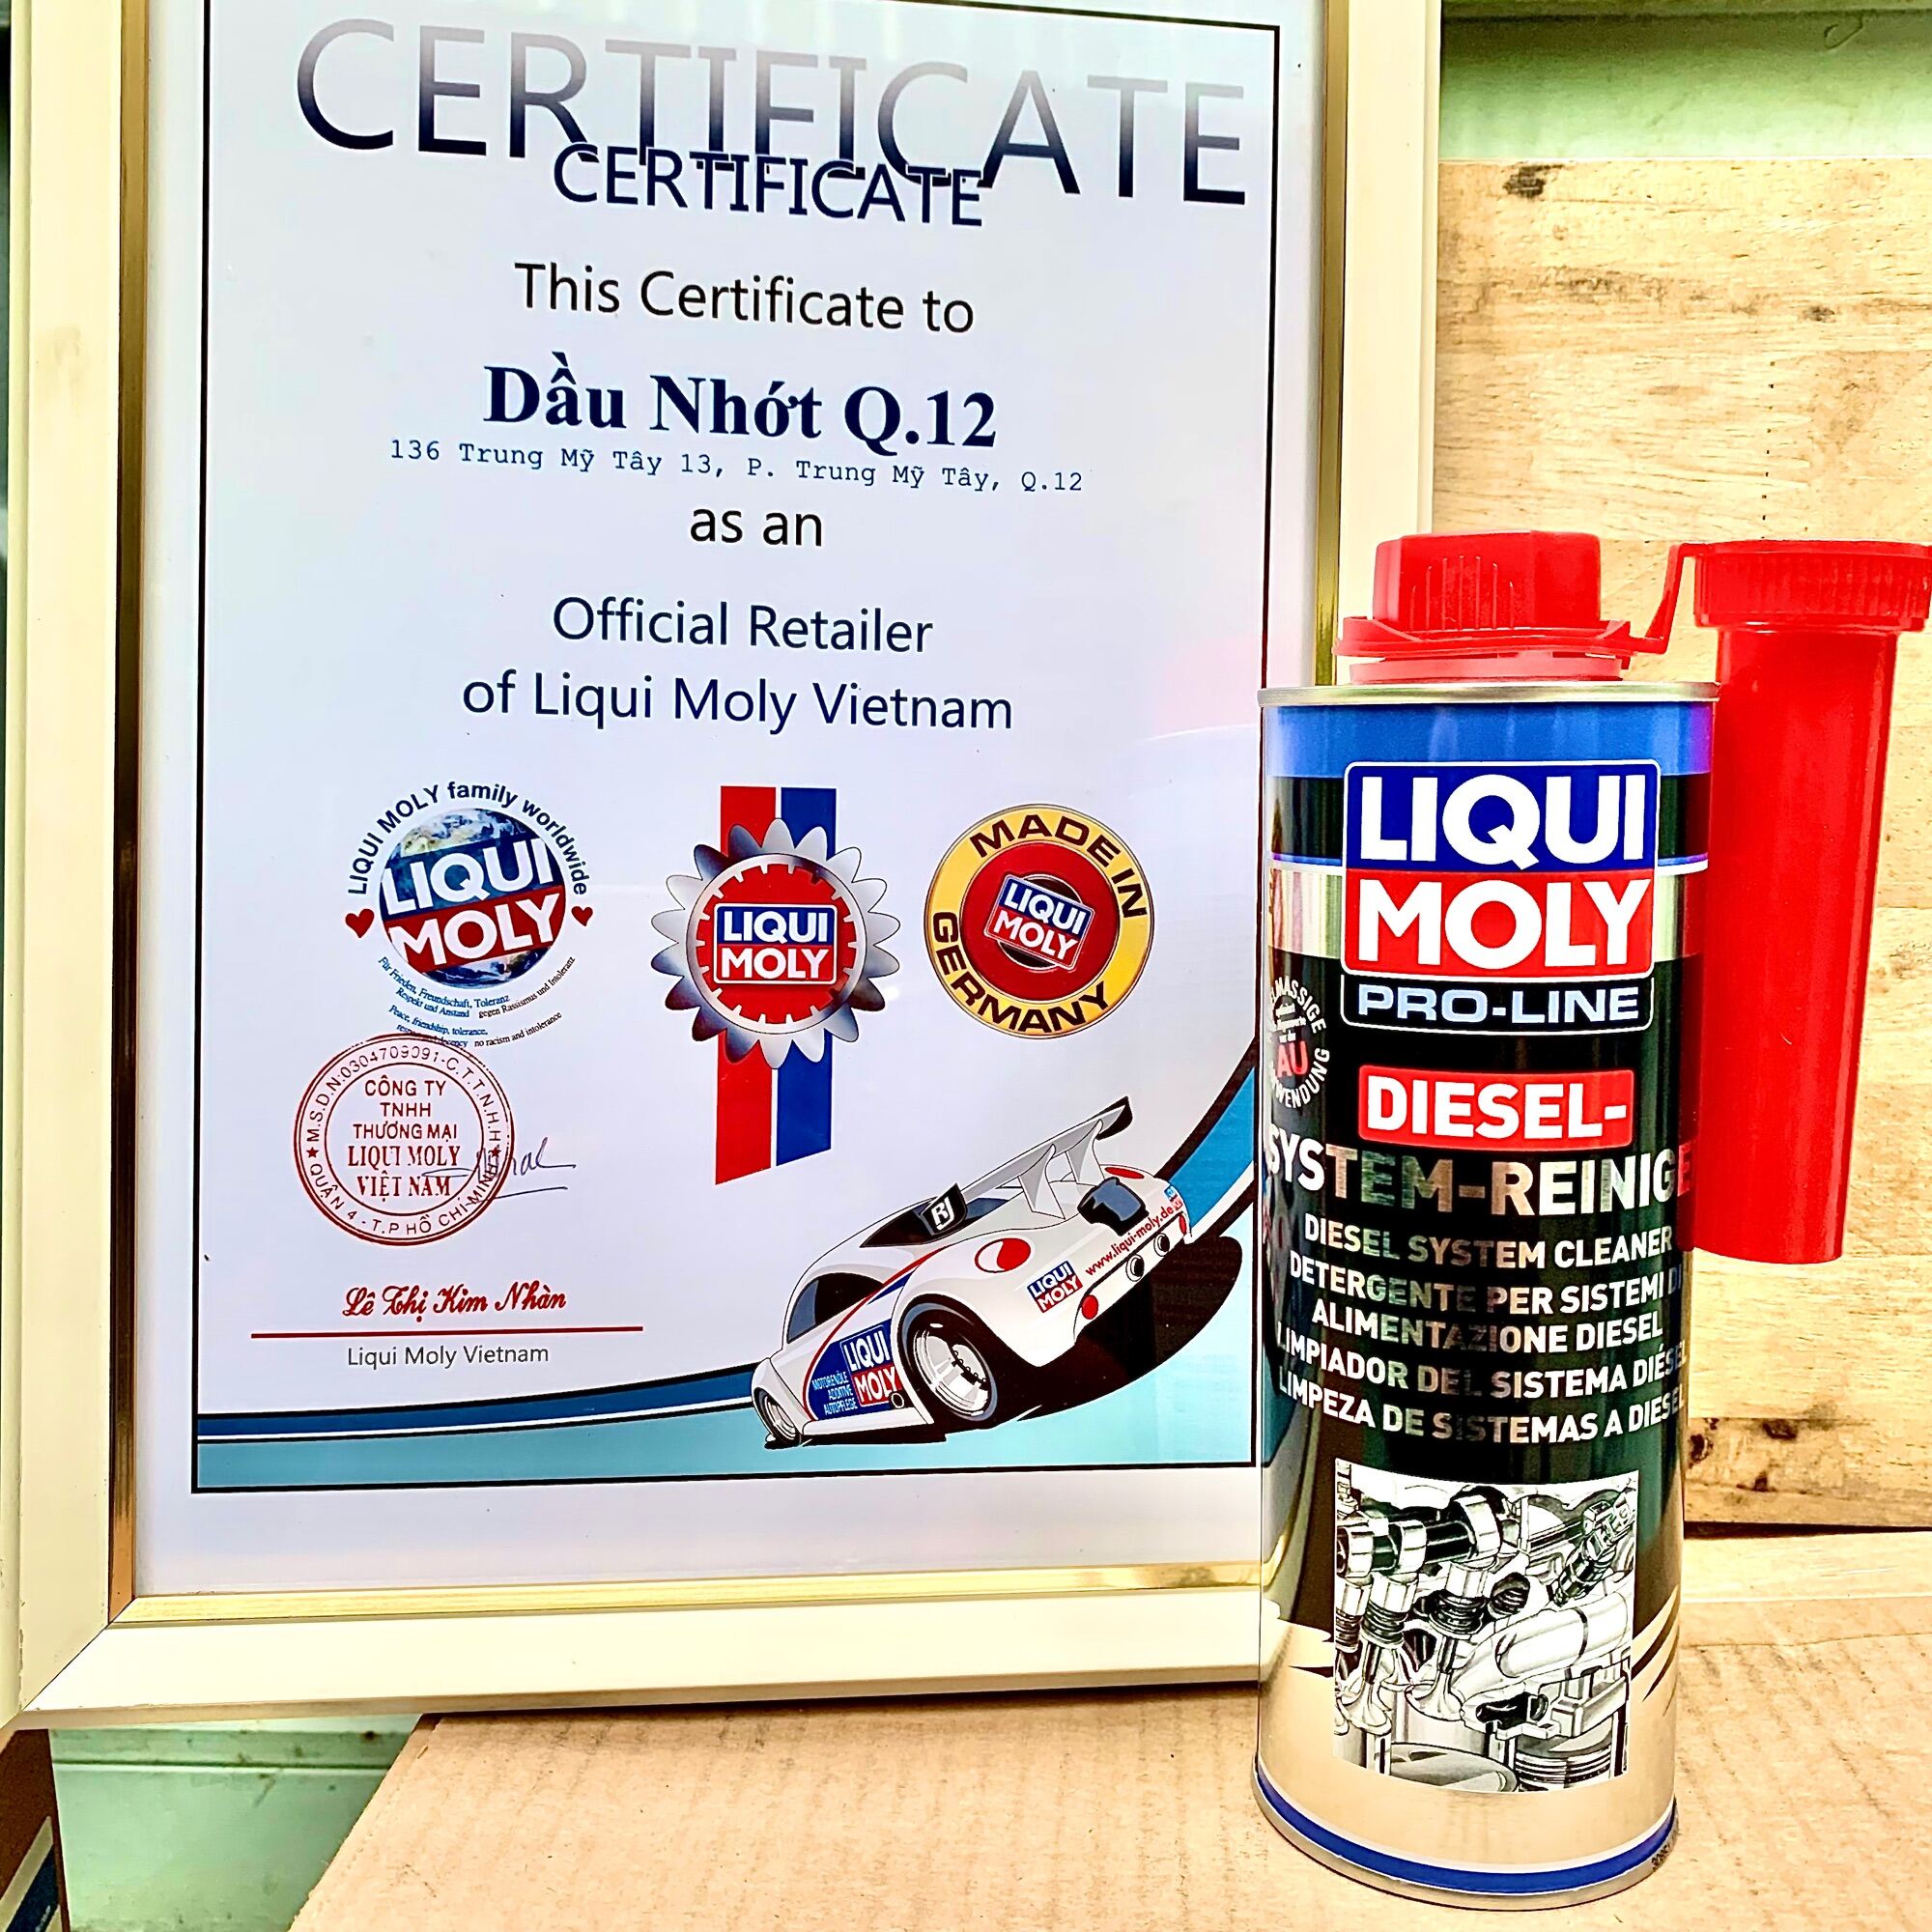 Phụ Gia Súc Béc Dầu Cao Cấp LIQUI MOLY Pro-Line Diesel System Reiniger 5156 - 500ML Made in Germany